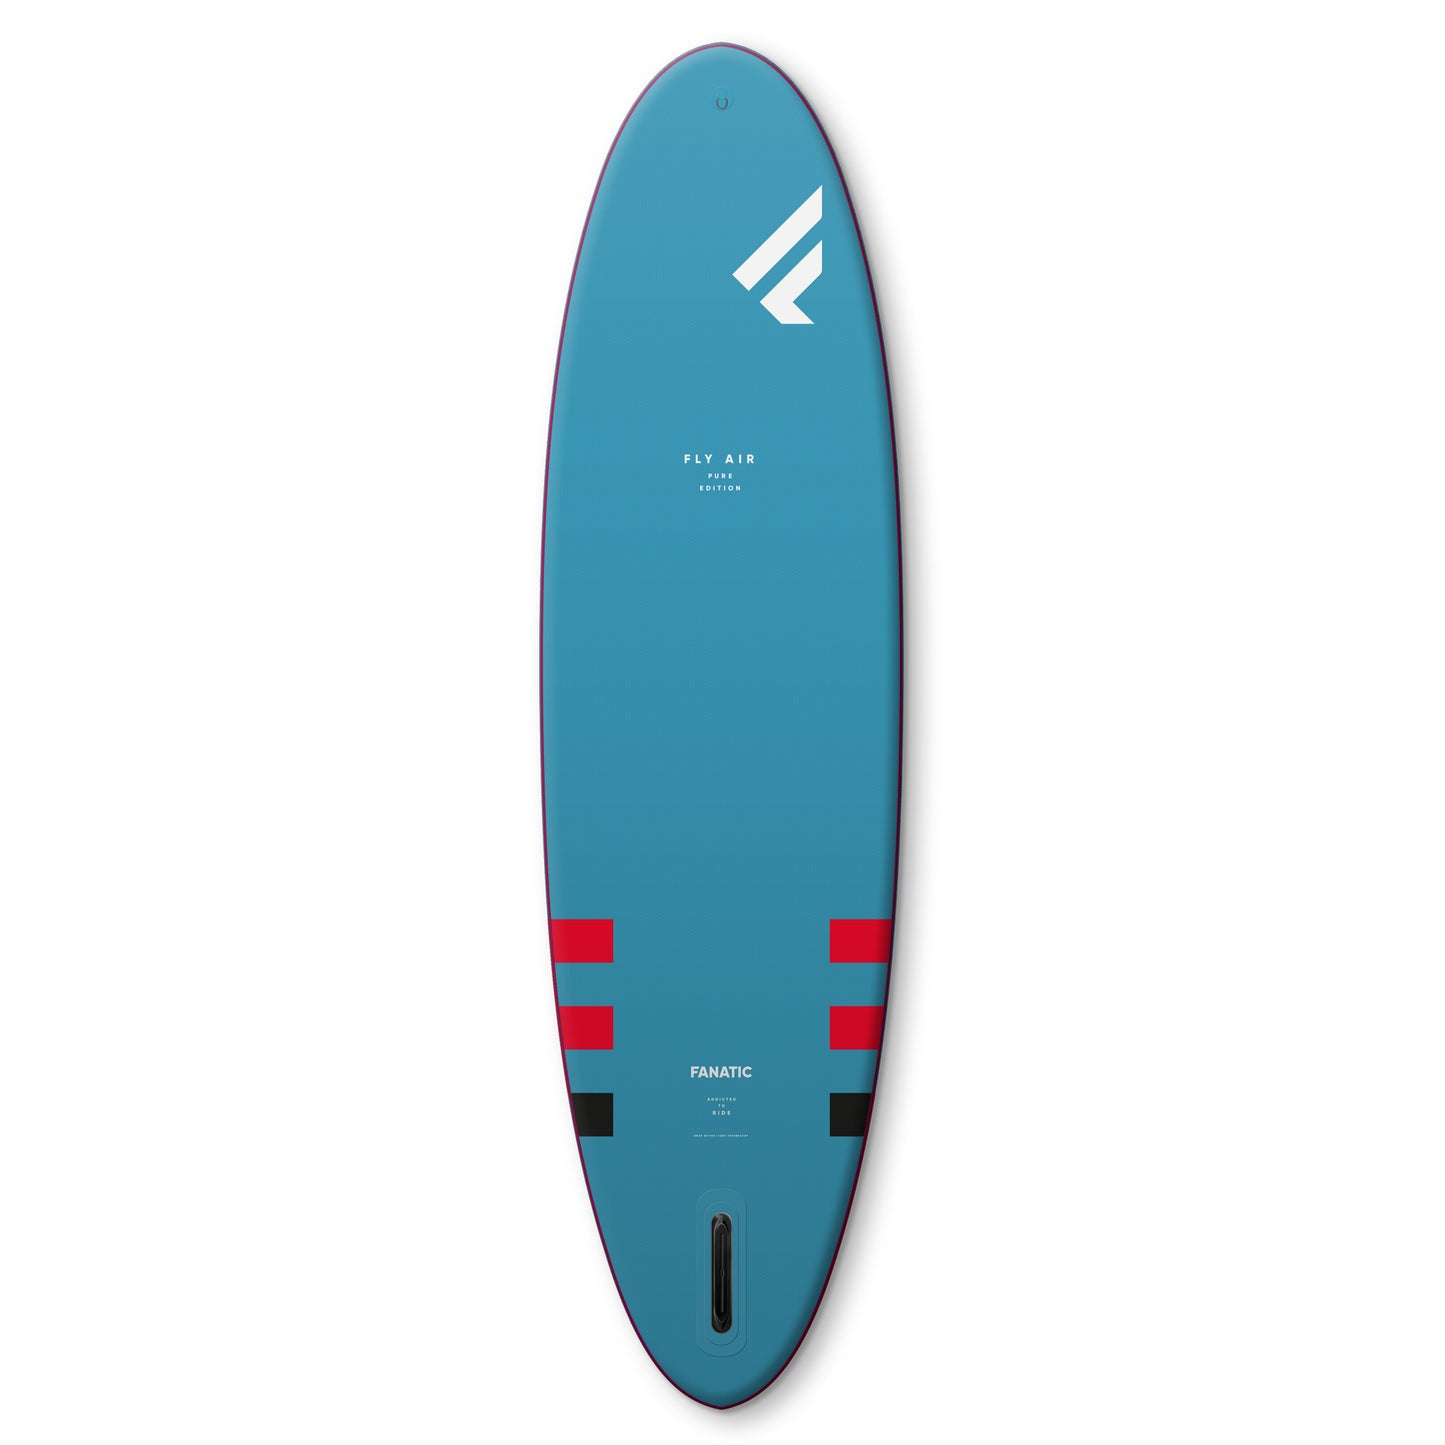 Fanatic iSUP Fly Air – Inflatabale SUP